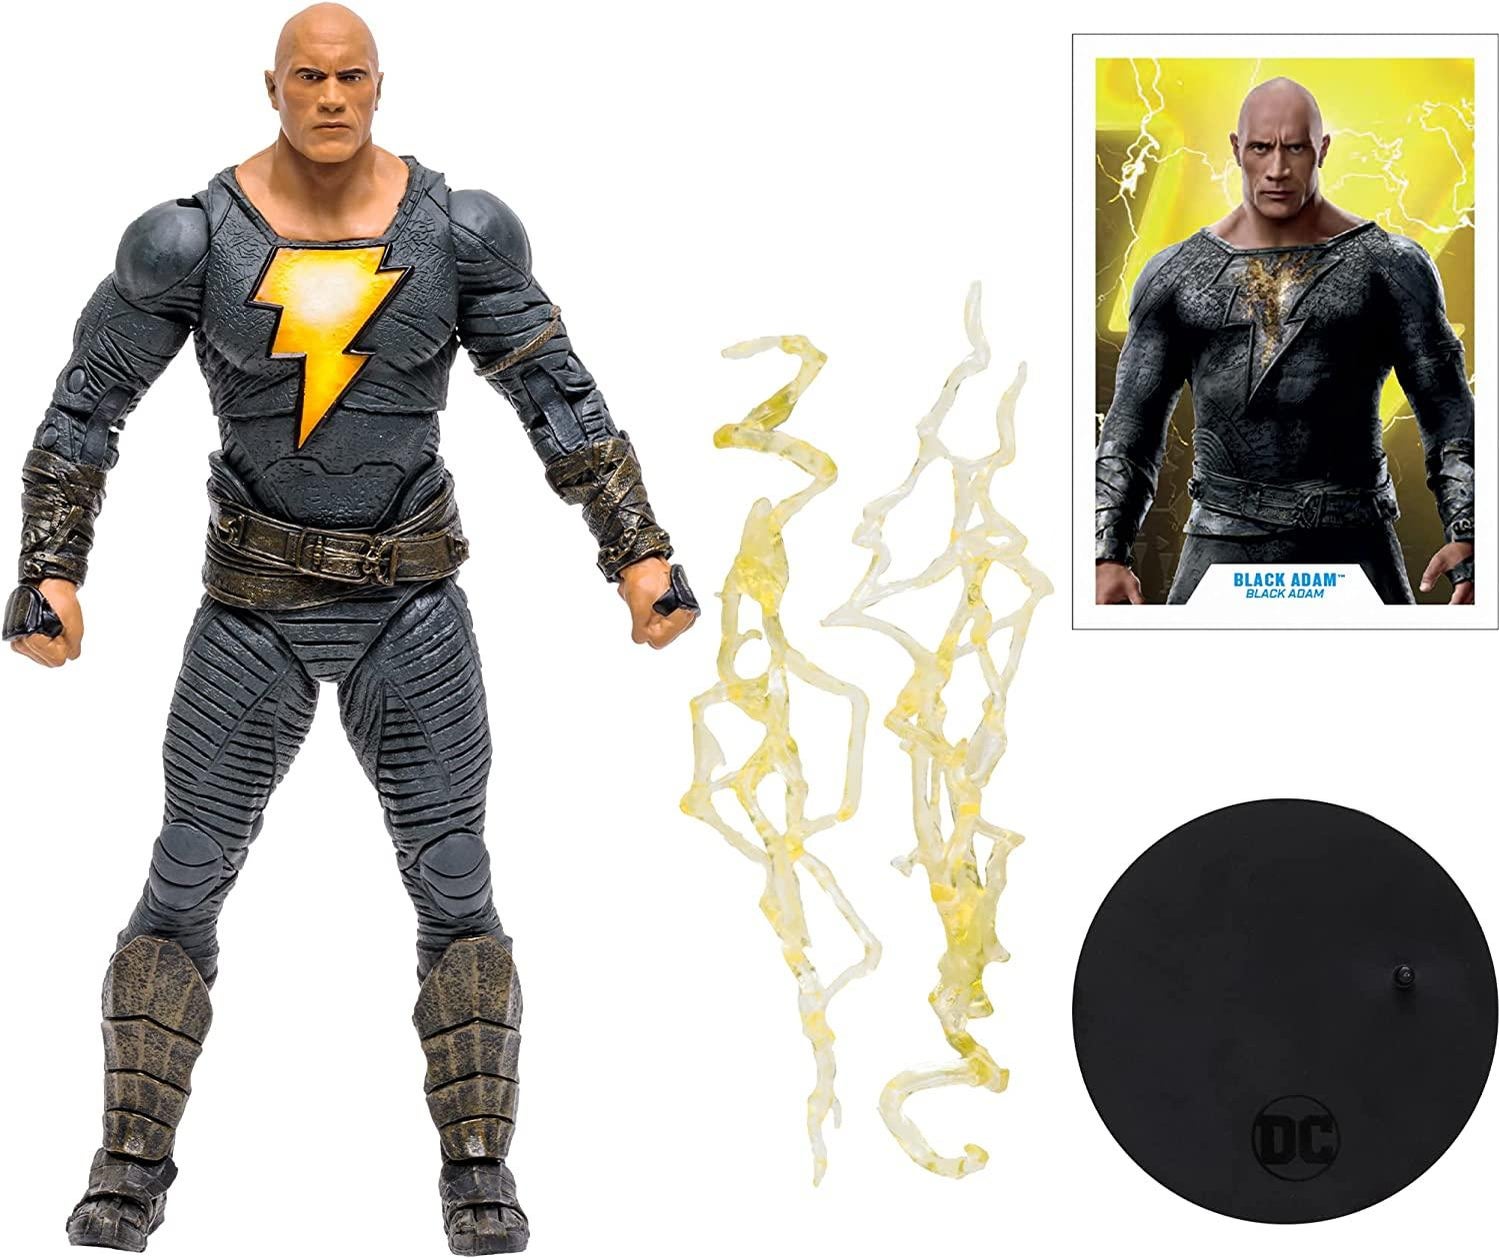 Black Adam DC Multiverse Action Figures Are On Sale Now